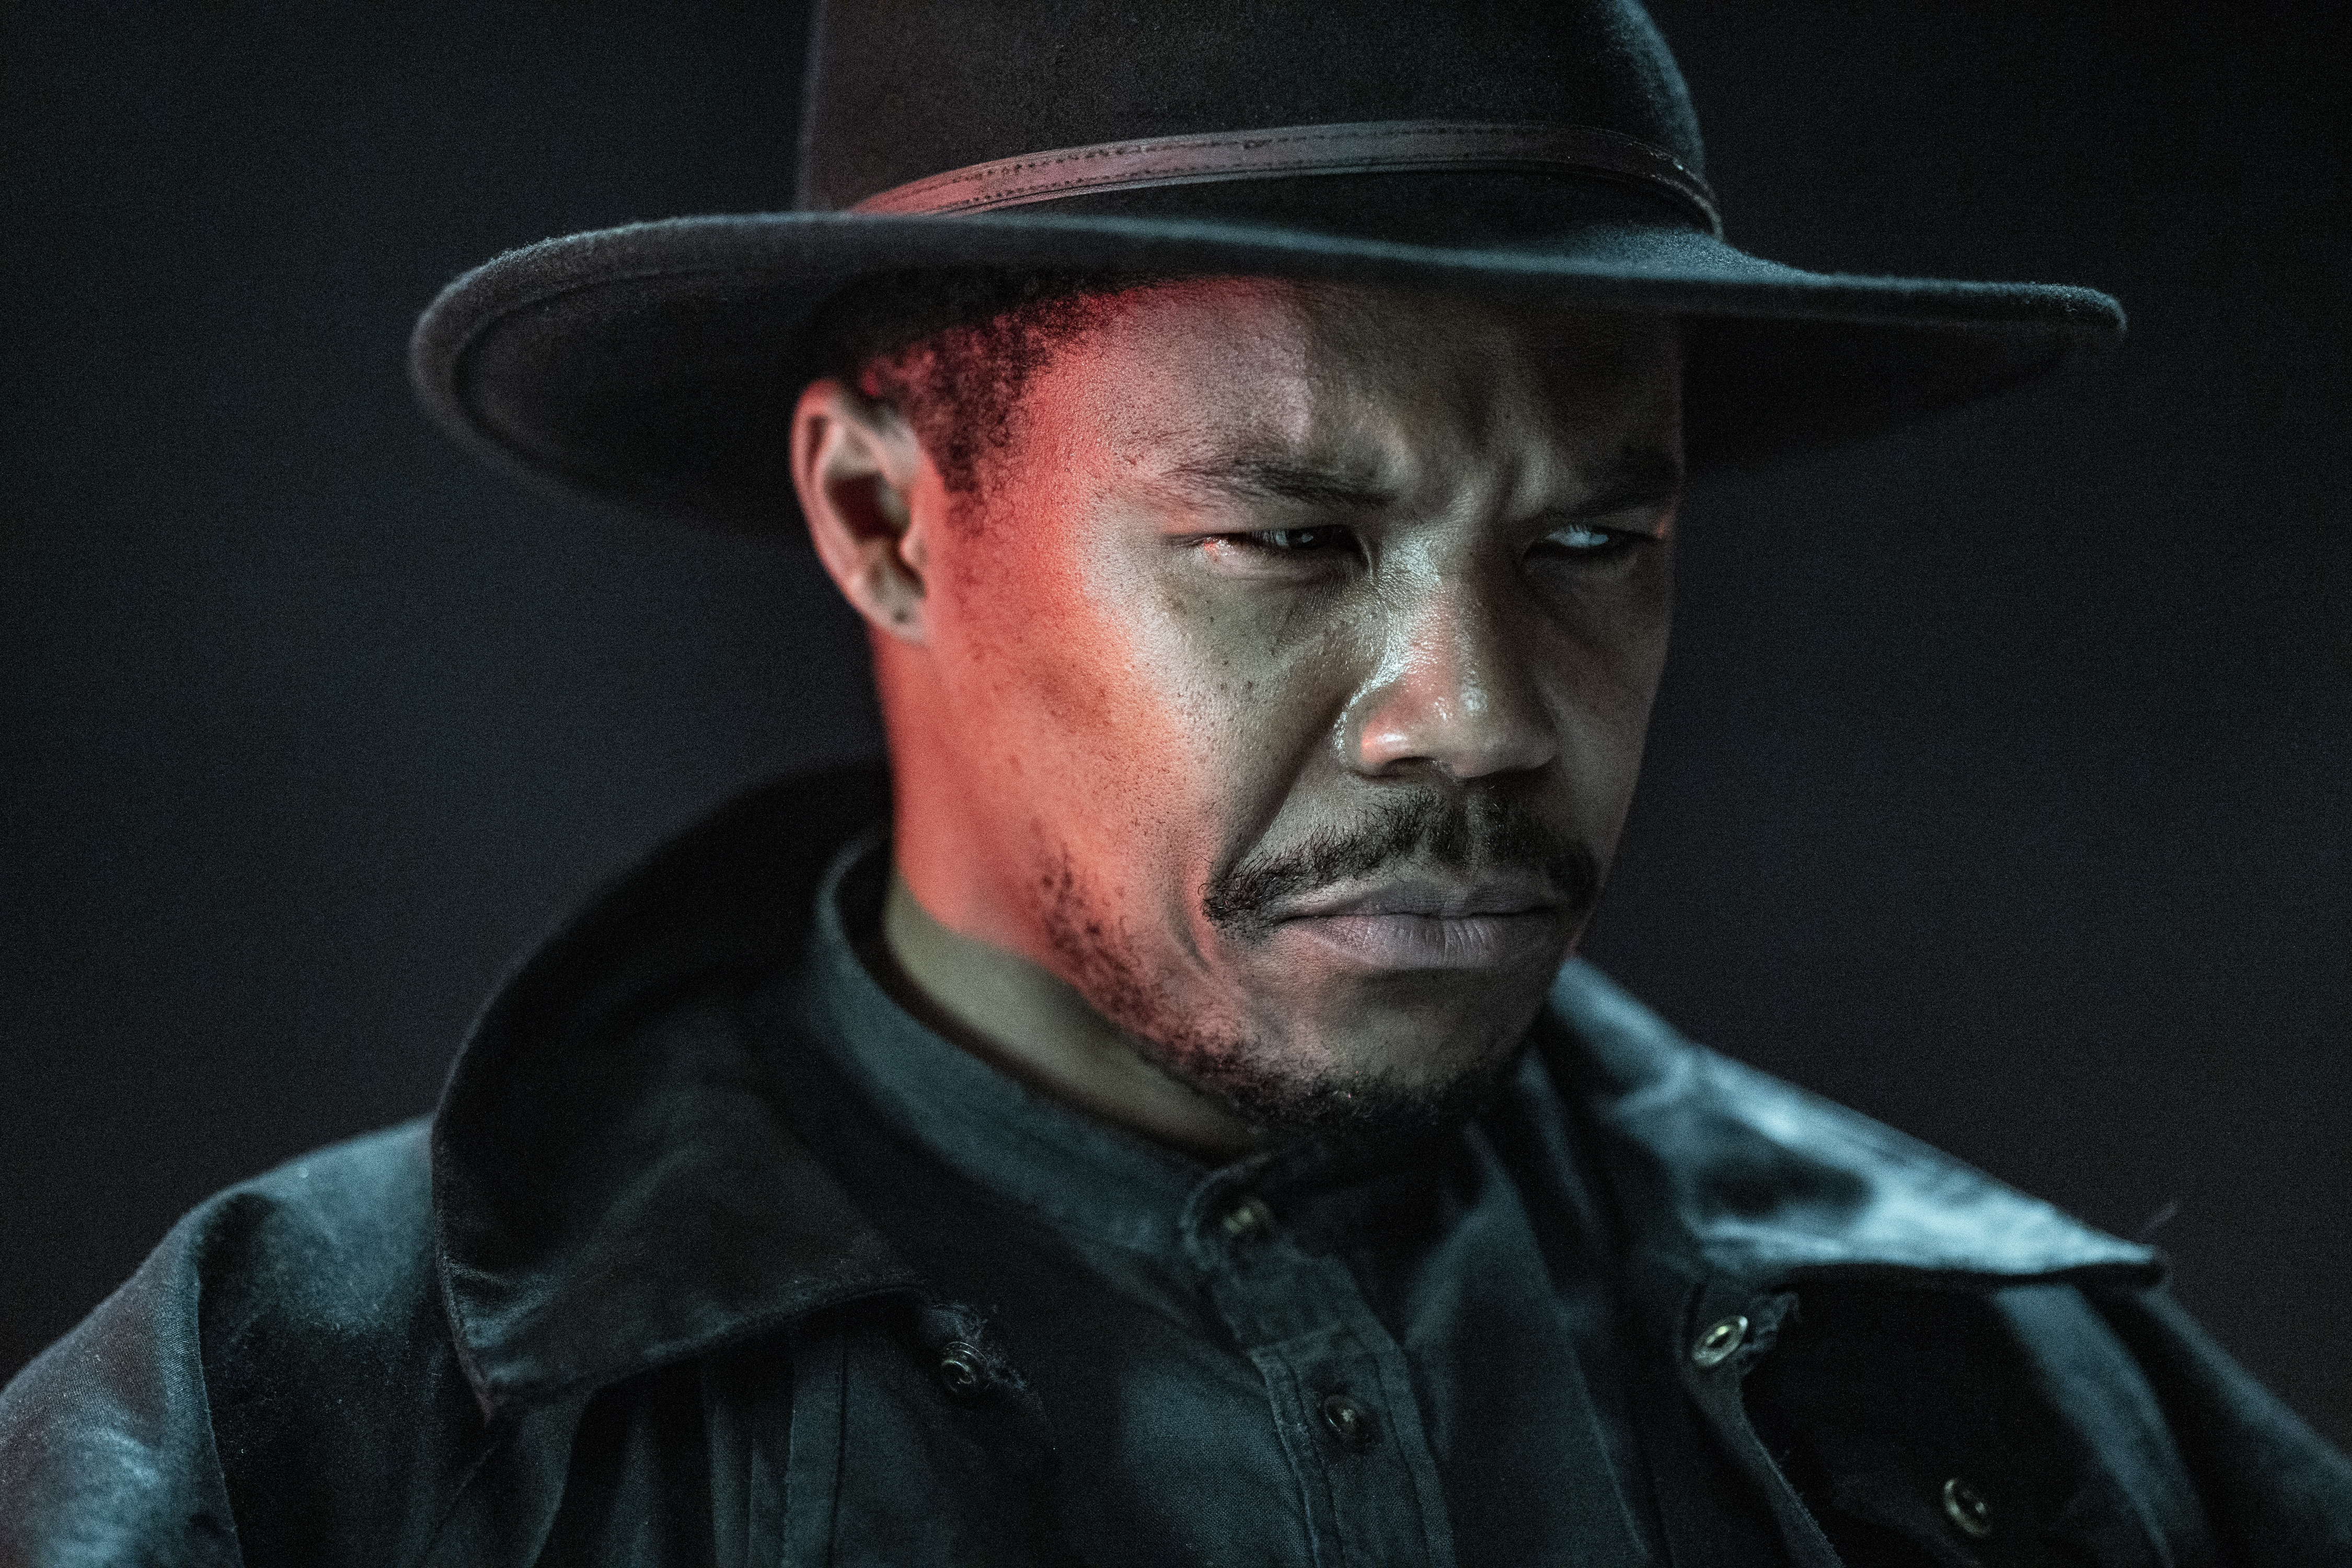 Publicity image of Gaius Charles as Perlie Armstrong on AMC's 'The Walking Dead: Dead City.' We see him from the shoulders up. He is a Black man wearing a wide-brimmed fedora/cowboy hat, a black leather jacket, and a denim button-down shirt. He has a mustache and the beginnings of a beard. He is scowling sternly and looking off to the side. 